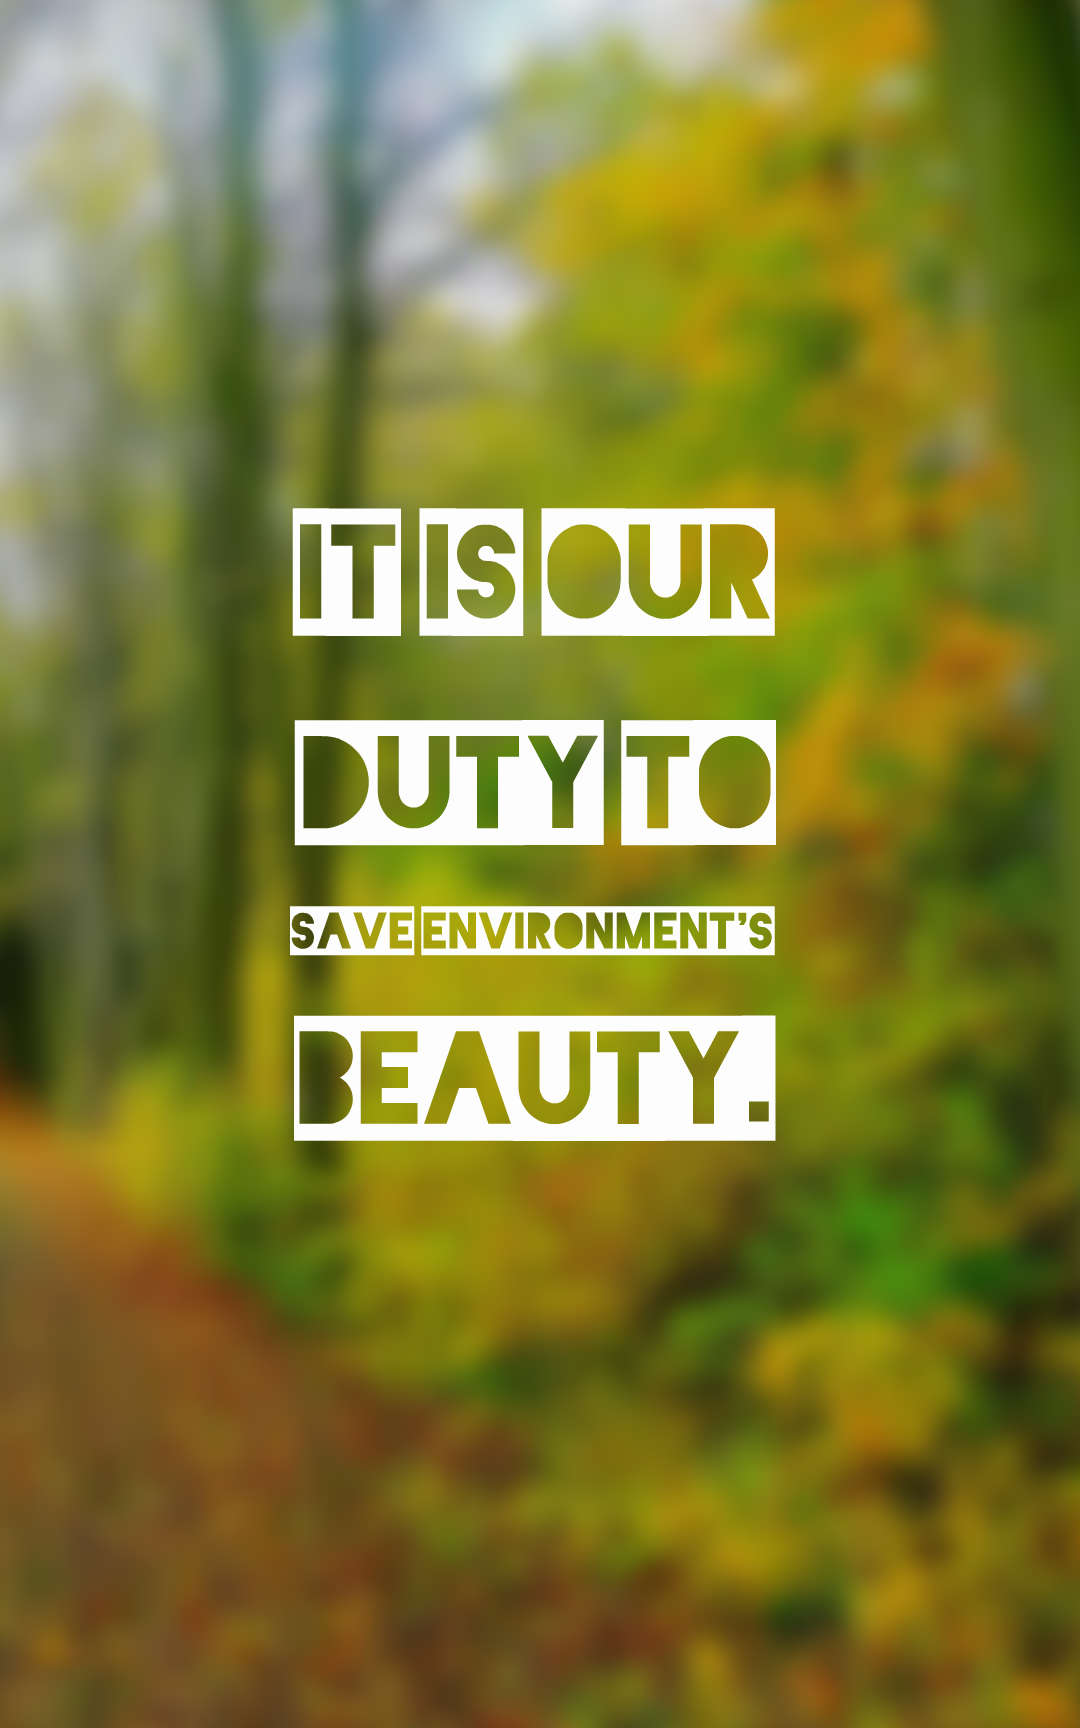 It is our duty to save environment’s beauty.